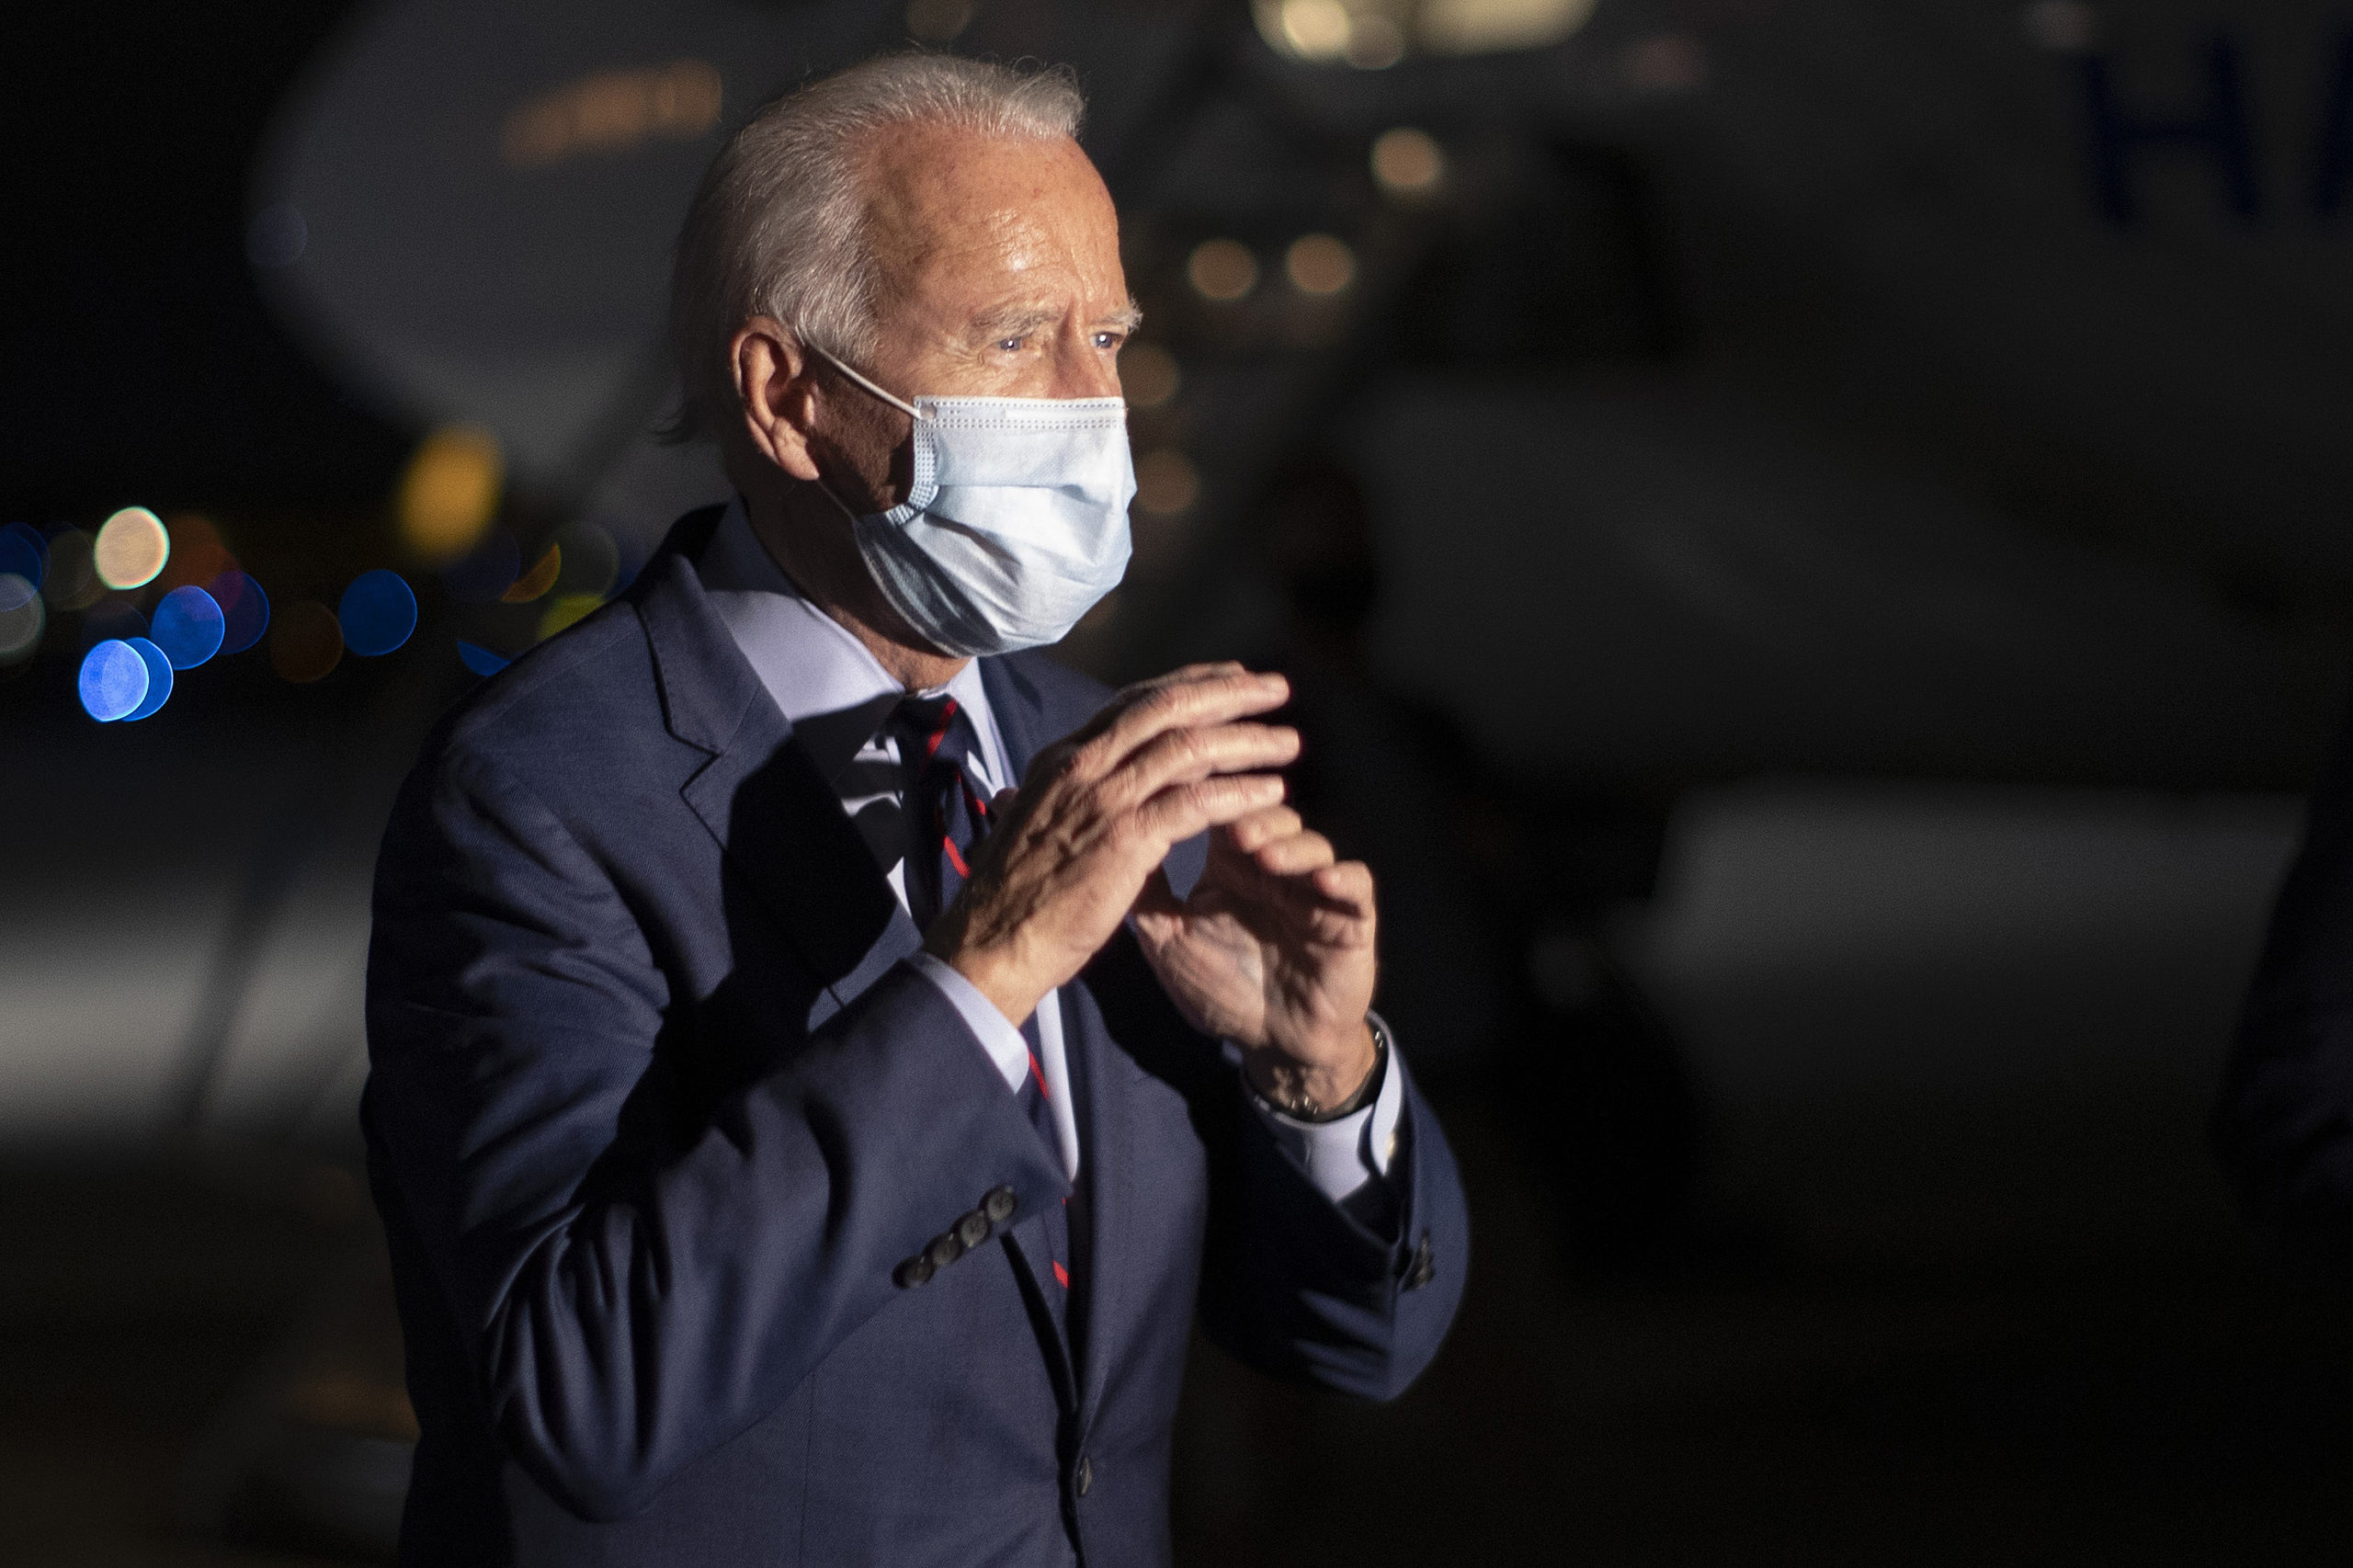 HEBRON, KY - OCTOBER 12: Wearing a face mask to reduce the risk posed by the coronavirus, Democratic presidential nominee Joe Biden talks to reporters before departing Cincinnati/Northern Kentucky International Airport October 12, 2020 in Hebron, Kentucky. With 21 days until the election, Biden campaigned in Toledo and Cincinnati. (Photo by Chip Somodevilla/Getty Images)